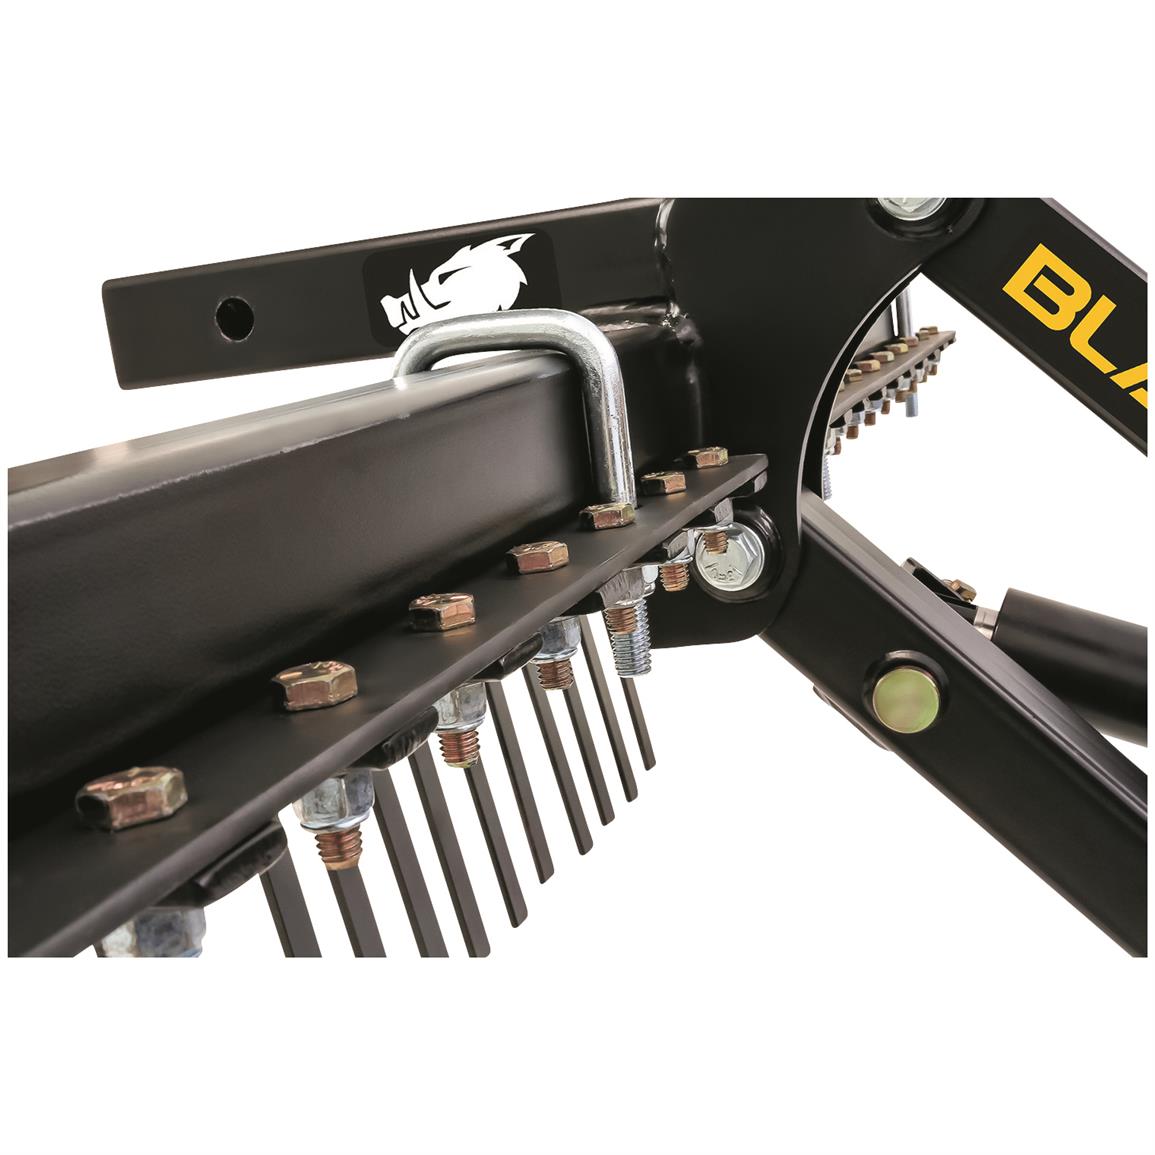 Kolpin Switchblade ATV Plow System - 707018, ATV Implements at Sportsman's  Guide